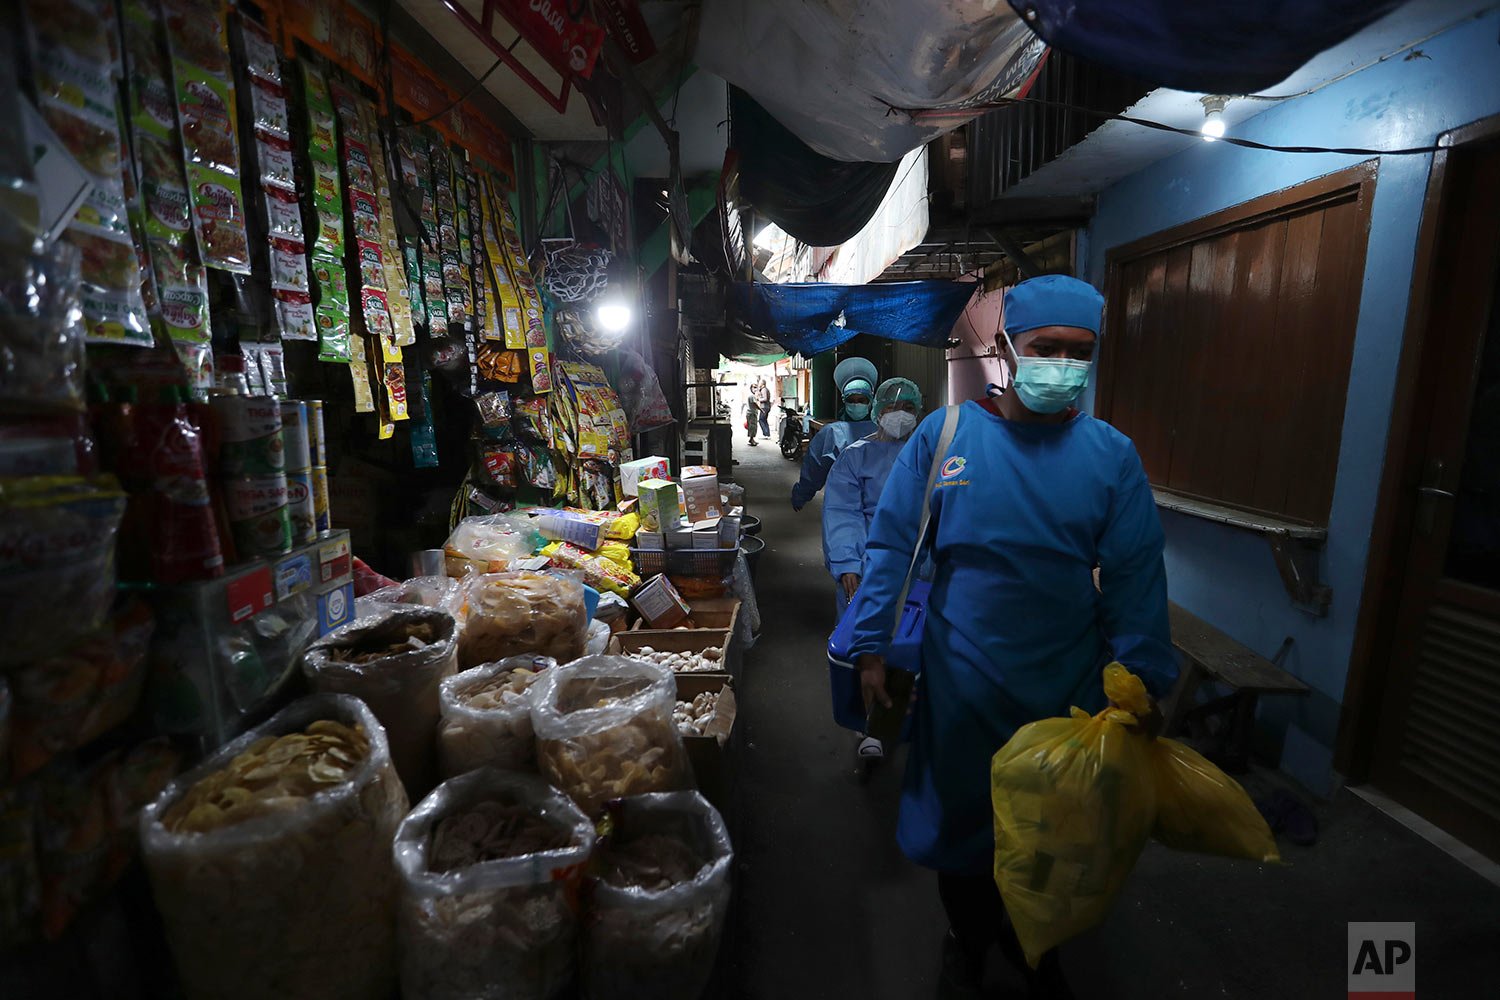  Health workers walk through a market as they conduct mass coronavirus tests in Jakarta, Indonesia, Monday, Jan. 10, 2022. (AP Photo/Achmad Ibrahim) 